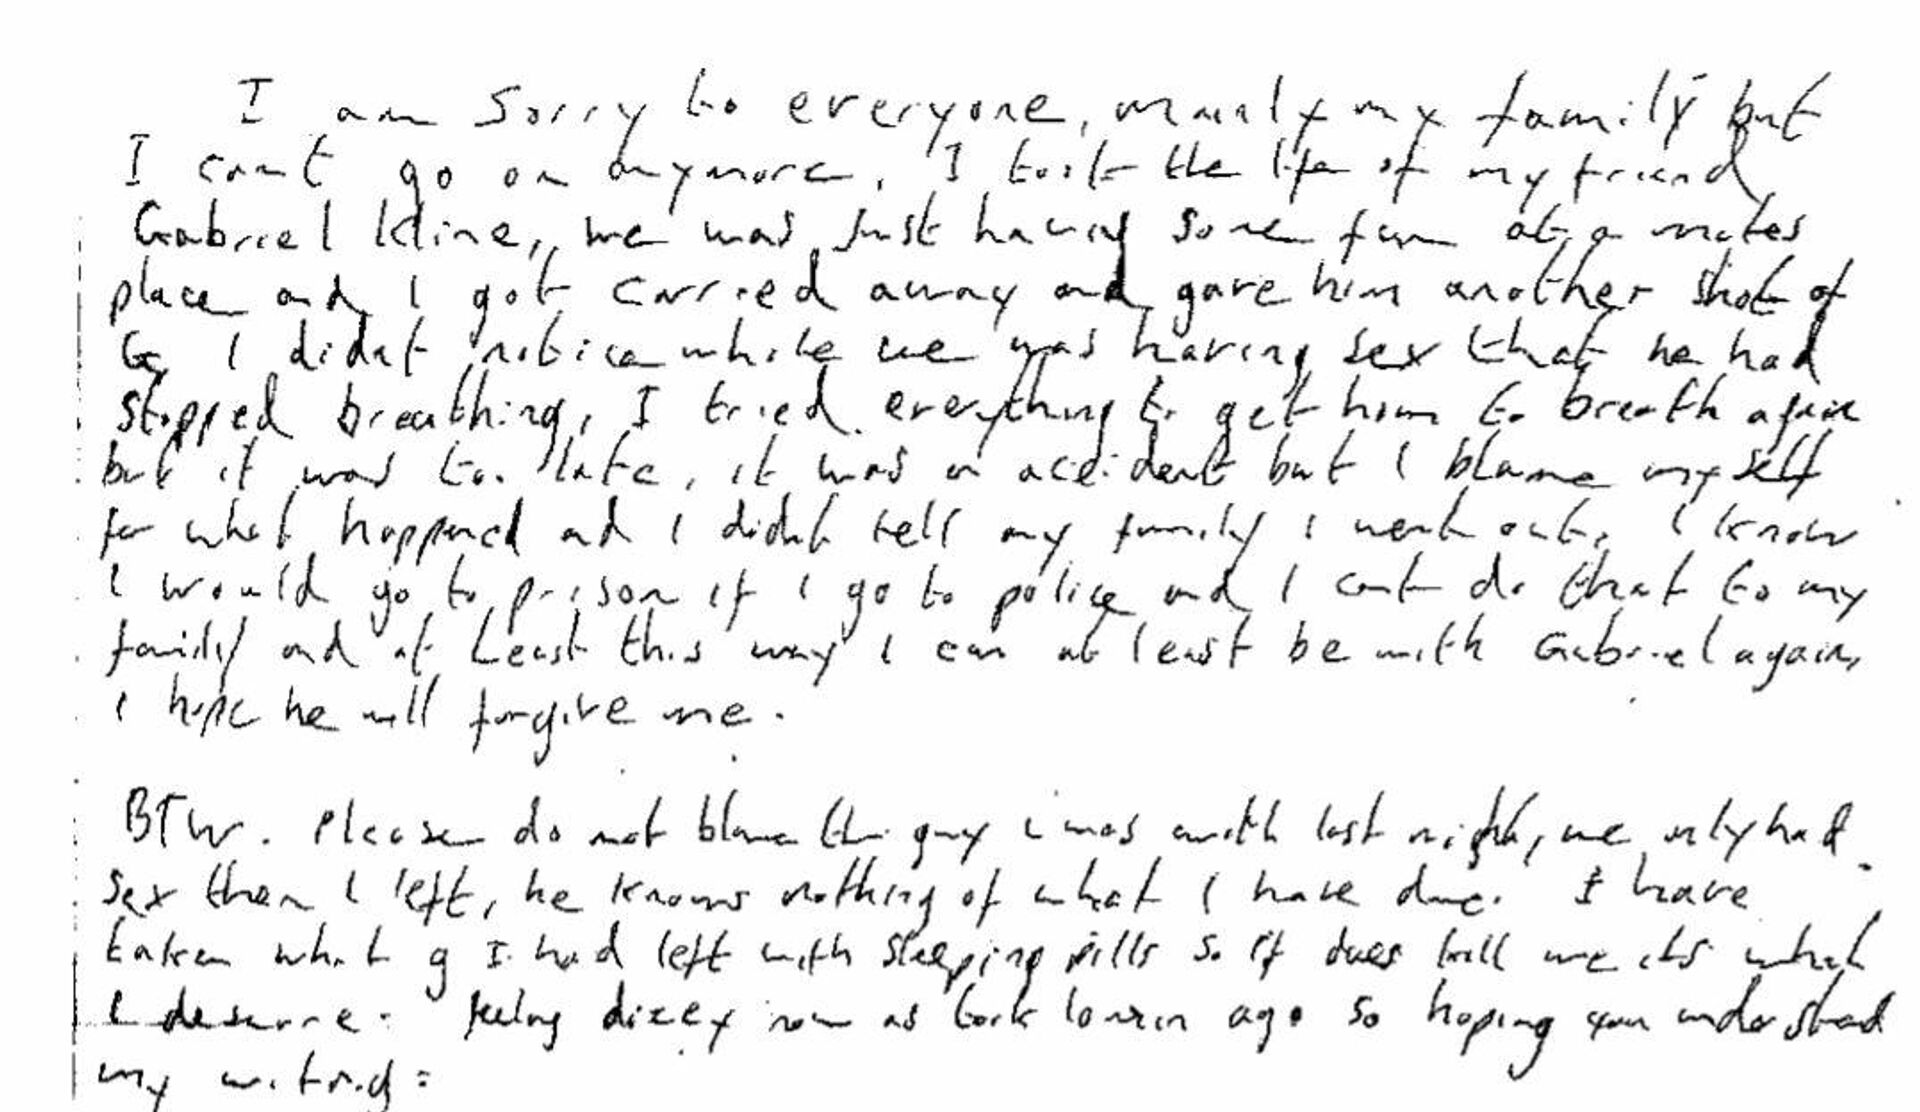 The fake suicide note Stephen Port wrote, pretending to be from Daniel Whitworth - Sputnik International, 1920, 06.10.2021